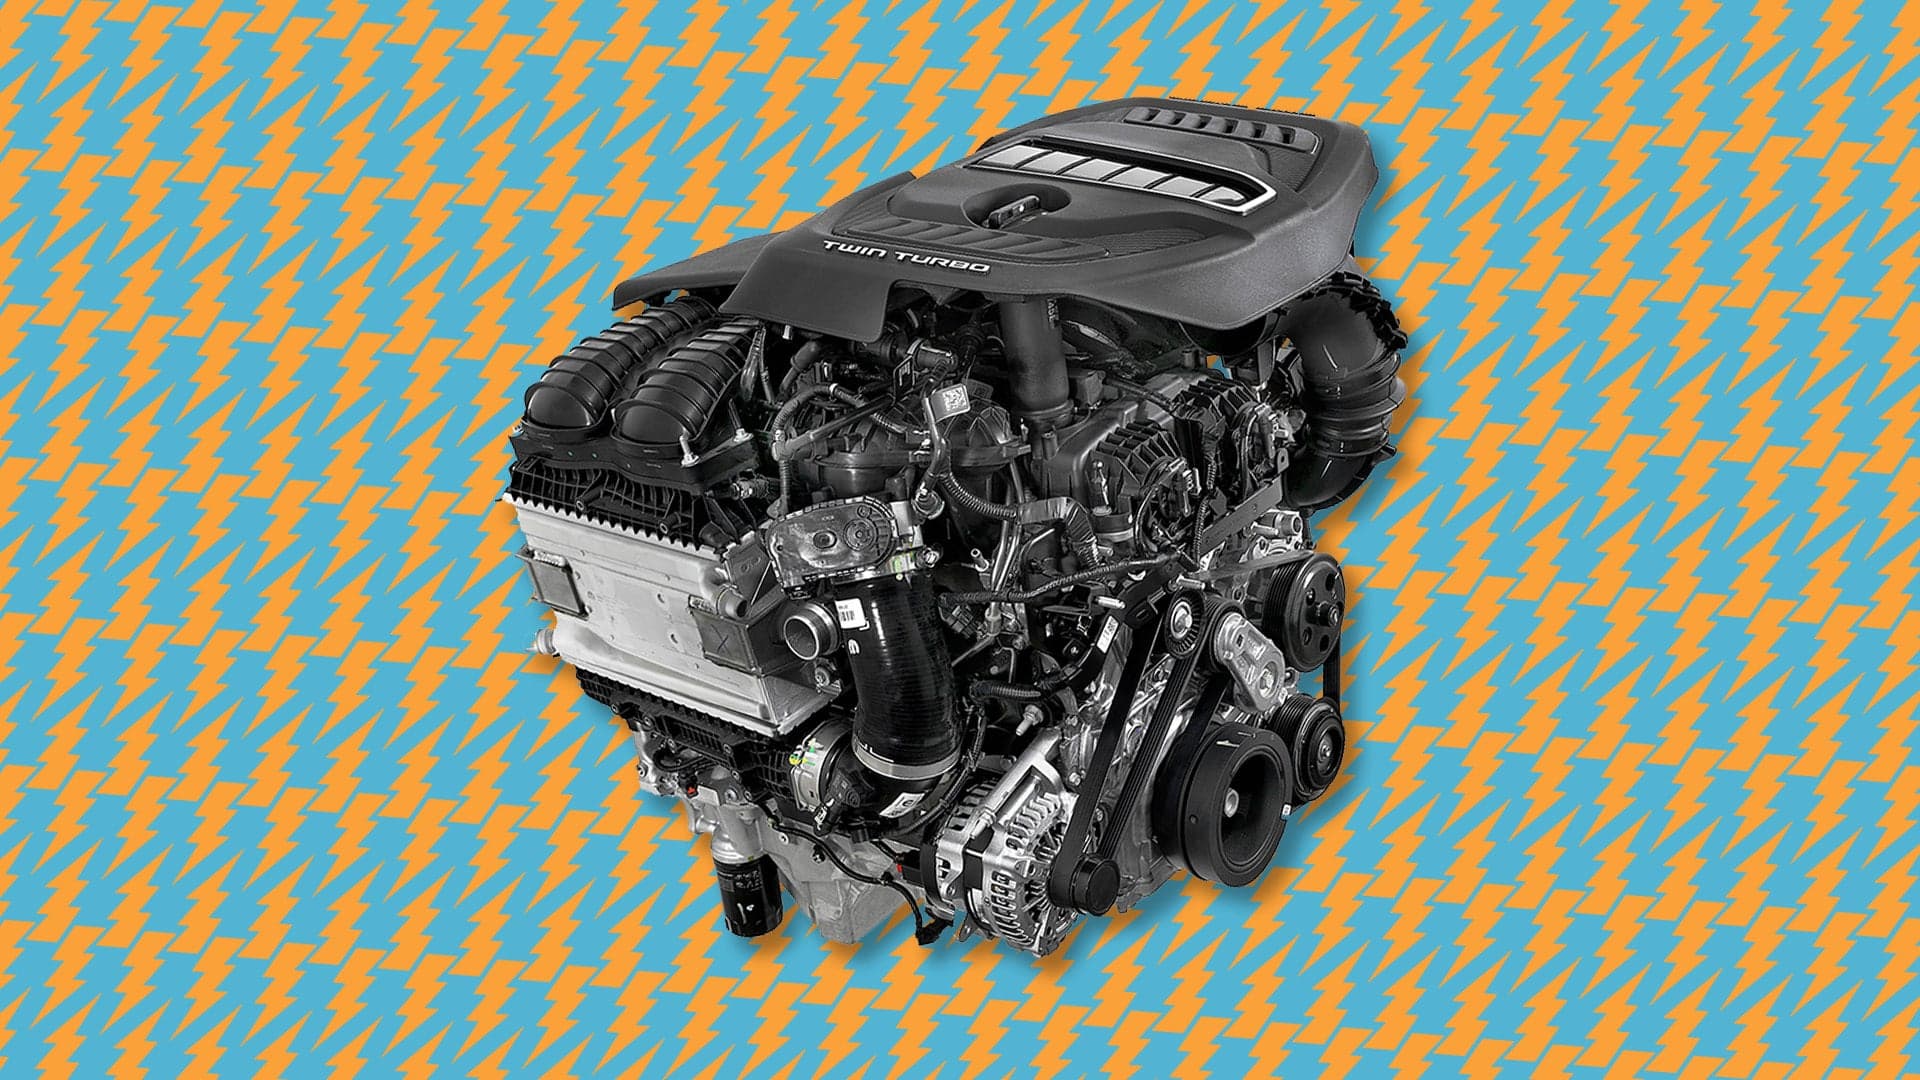 Why Stellantis Built a New Twin-Turbo I6 Engine on the Eve of Electrification